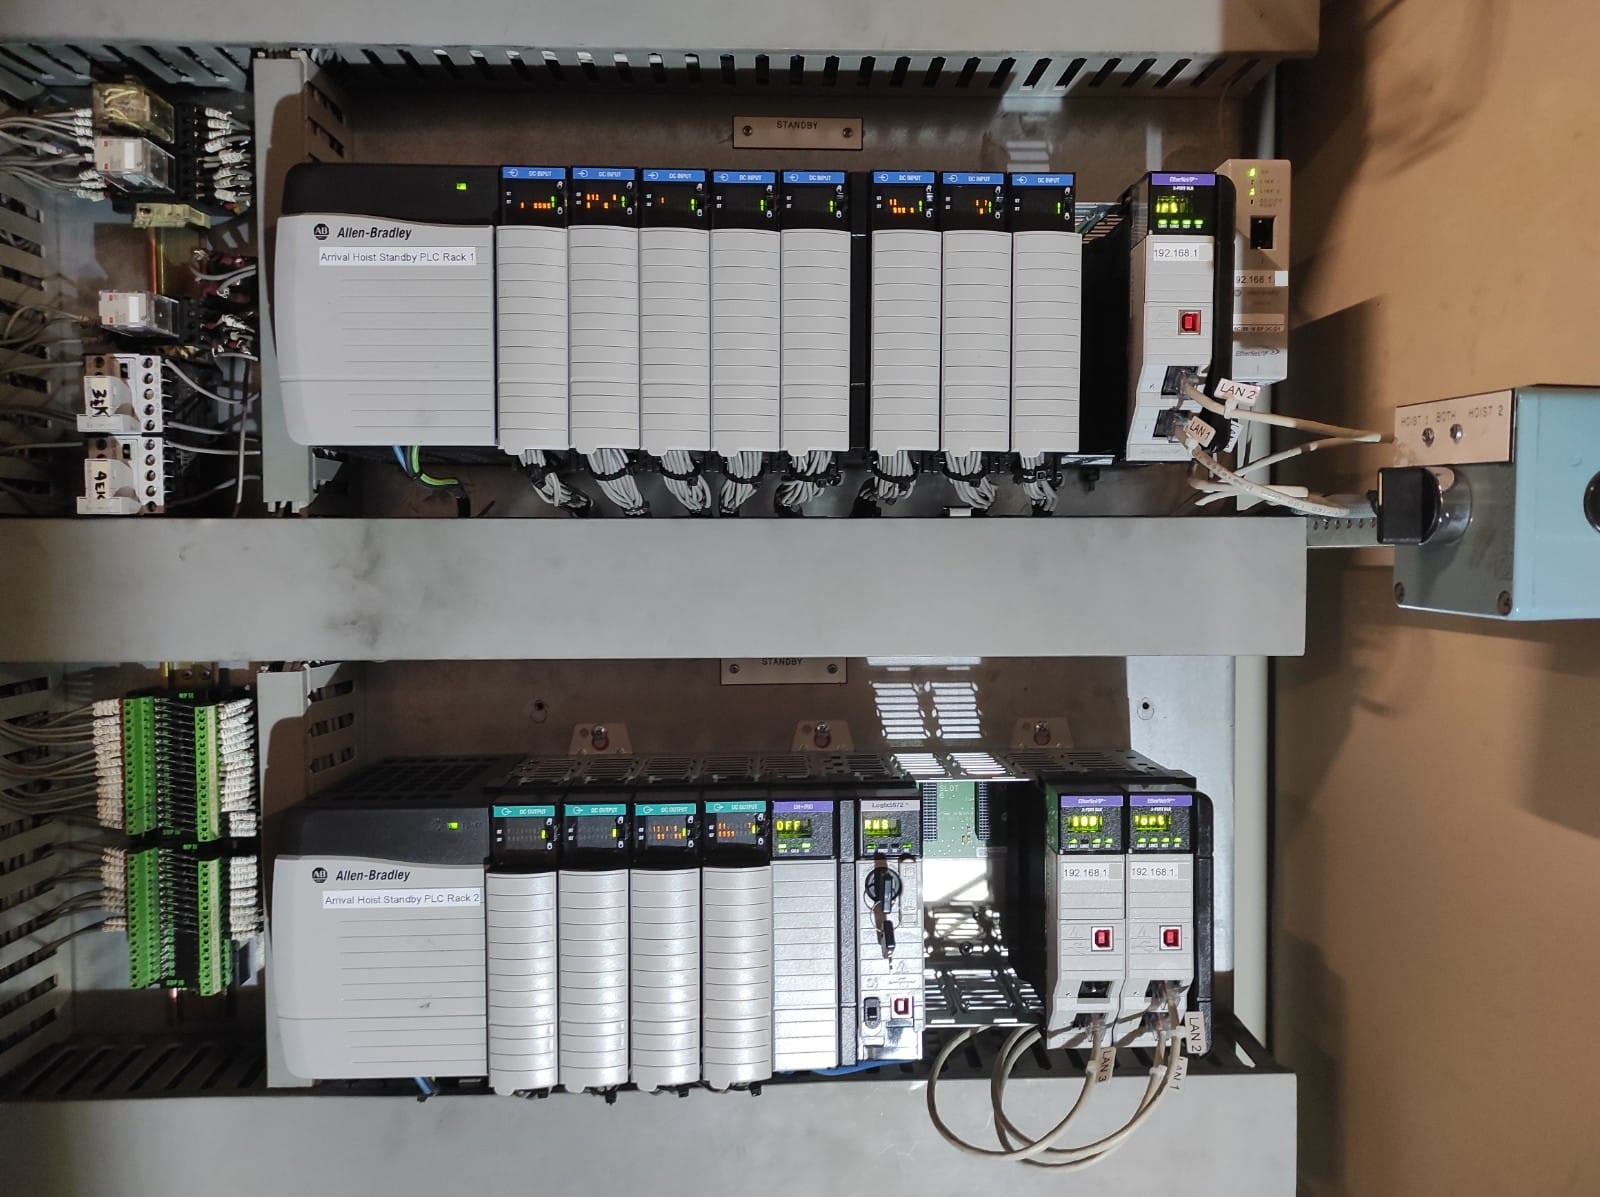 Close-up of New ControlLogix PLC Rack in Hoist PLC Panel (Typical) After Works